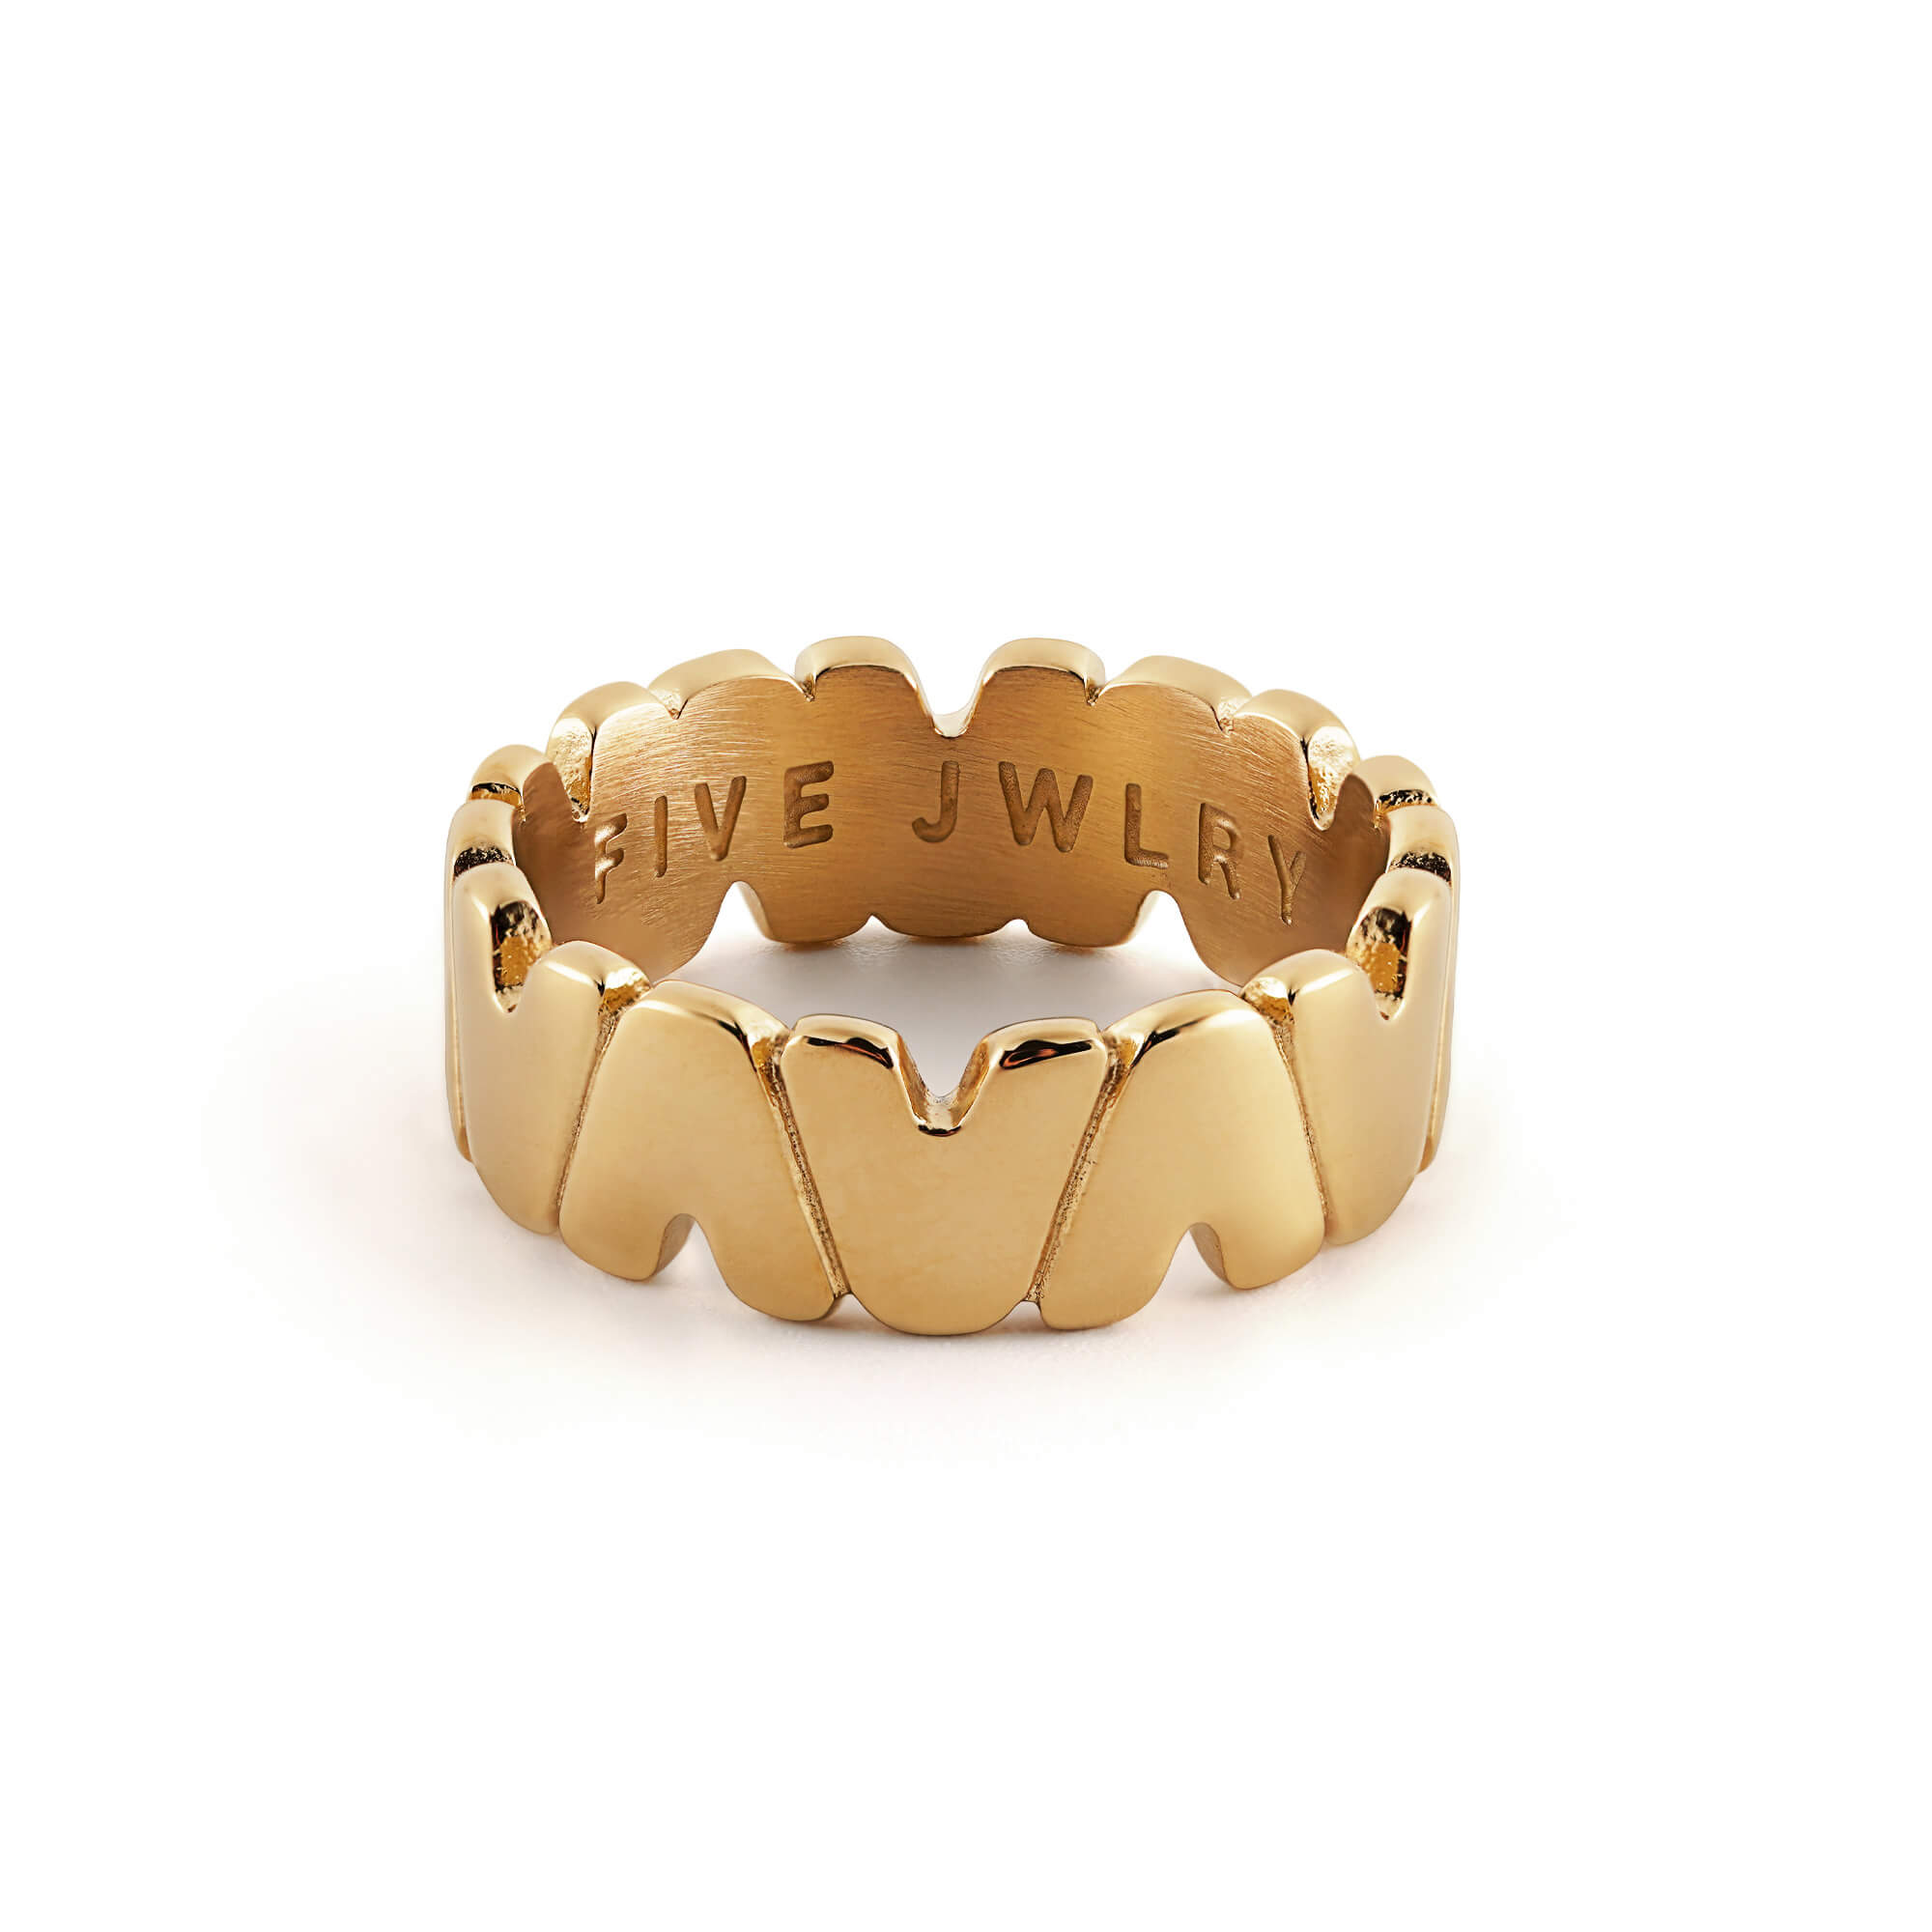 SAINQ men's ring by Five Jwlry, designed in 14k gold and uniquely shaped using the Roman numeral 'V' for five. Made from water-resistant 316L stainless steel. Hypoallergenic with a 2-year warranty.